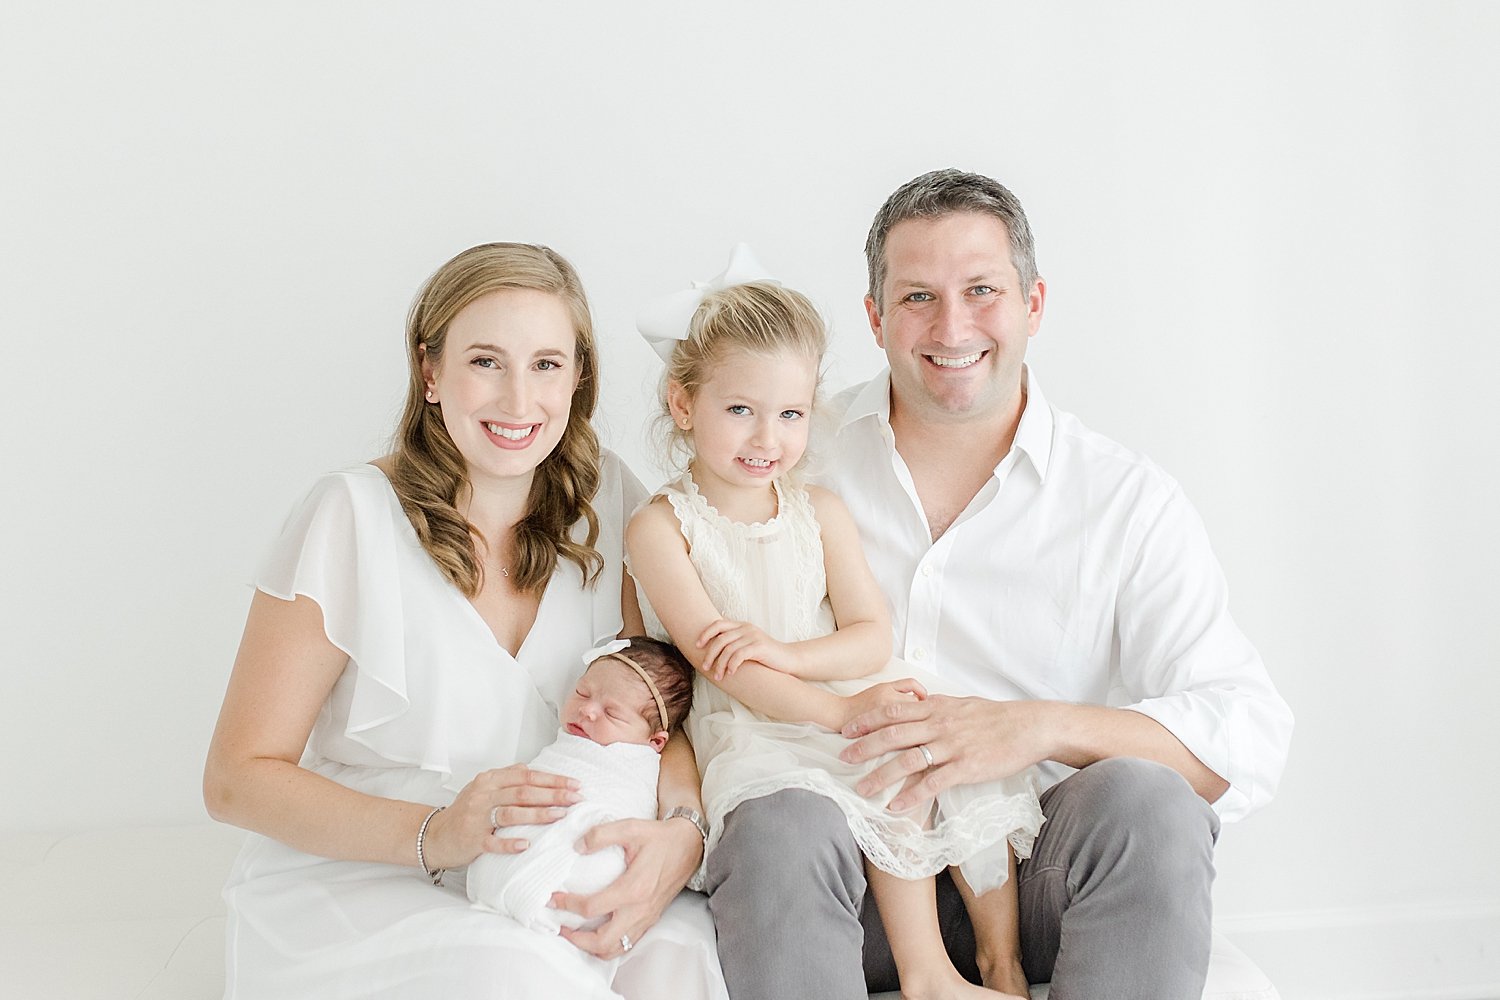 Family newborn session for baby girl in studio with Kristin Wood Photography